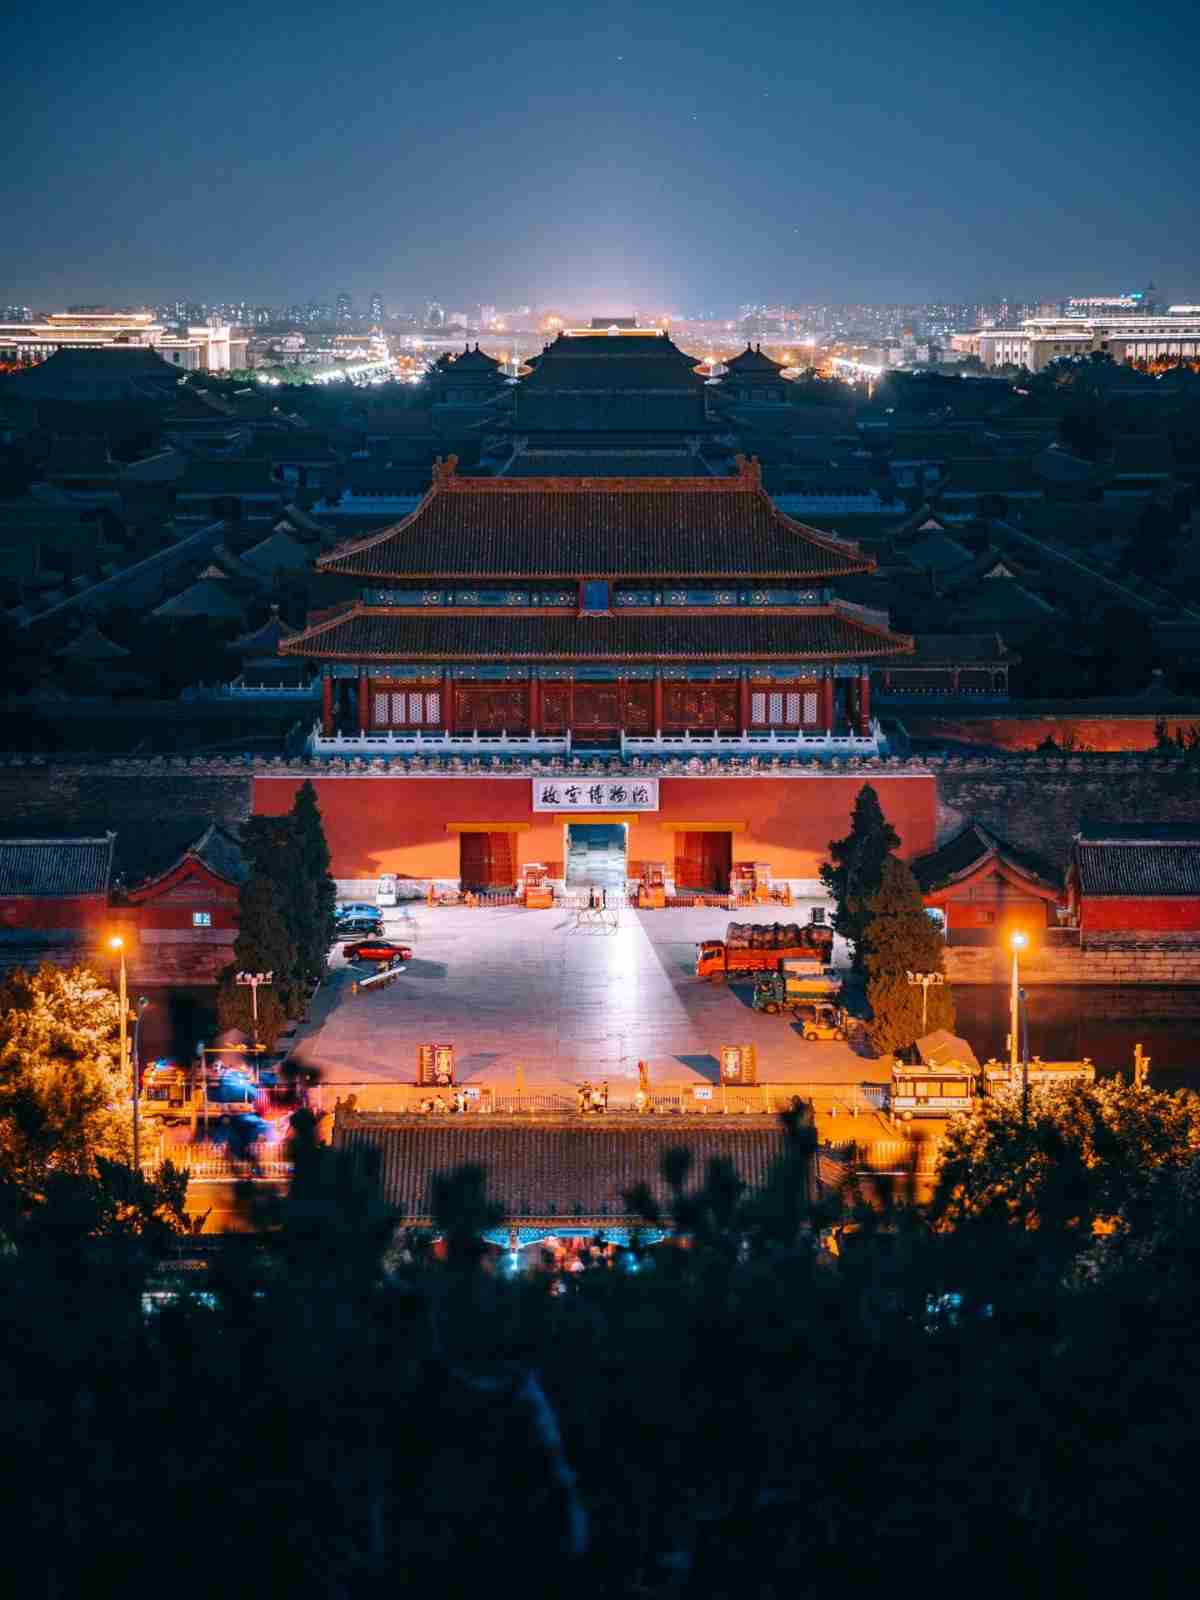 The Forbidden City night view